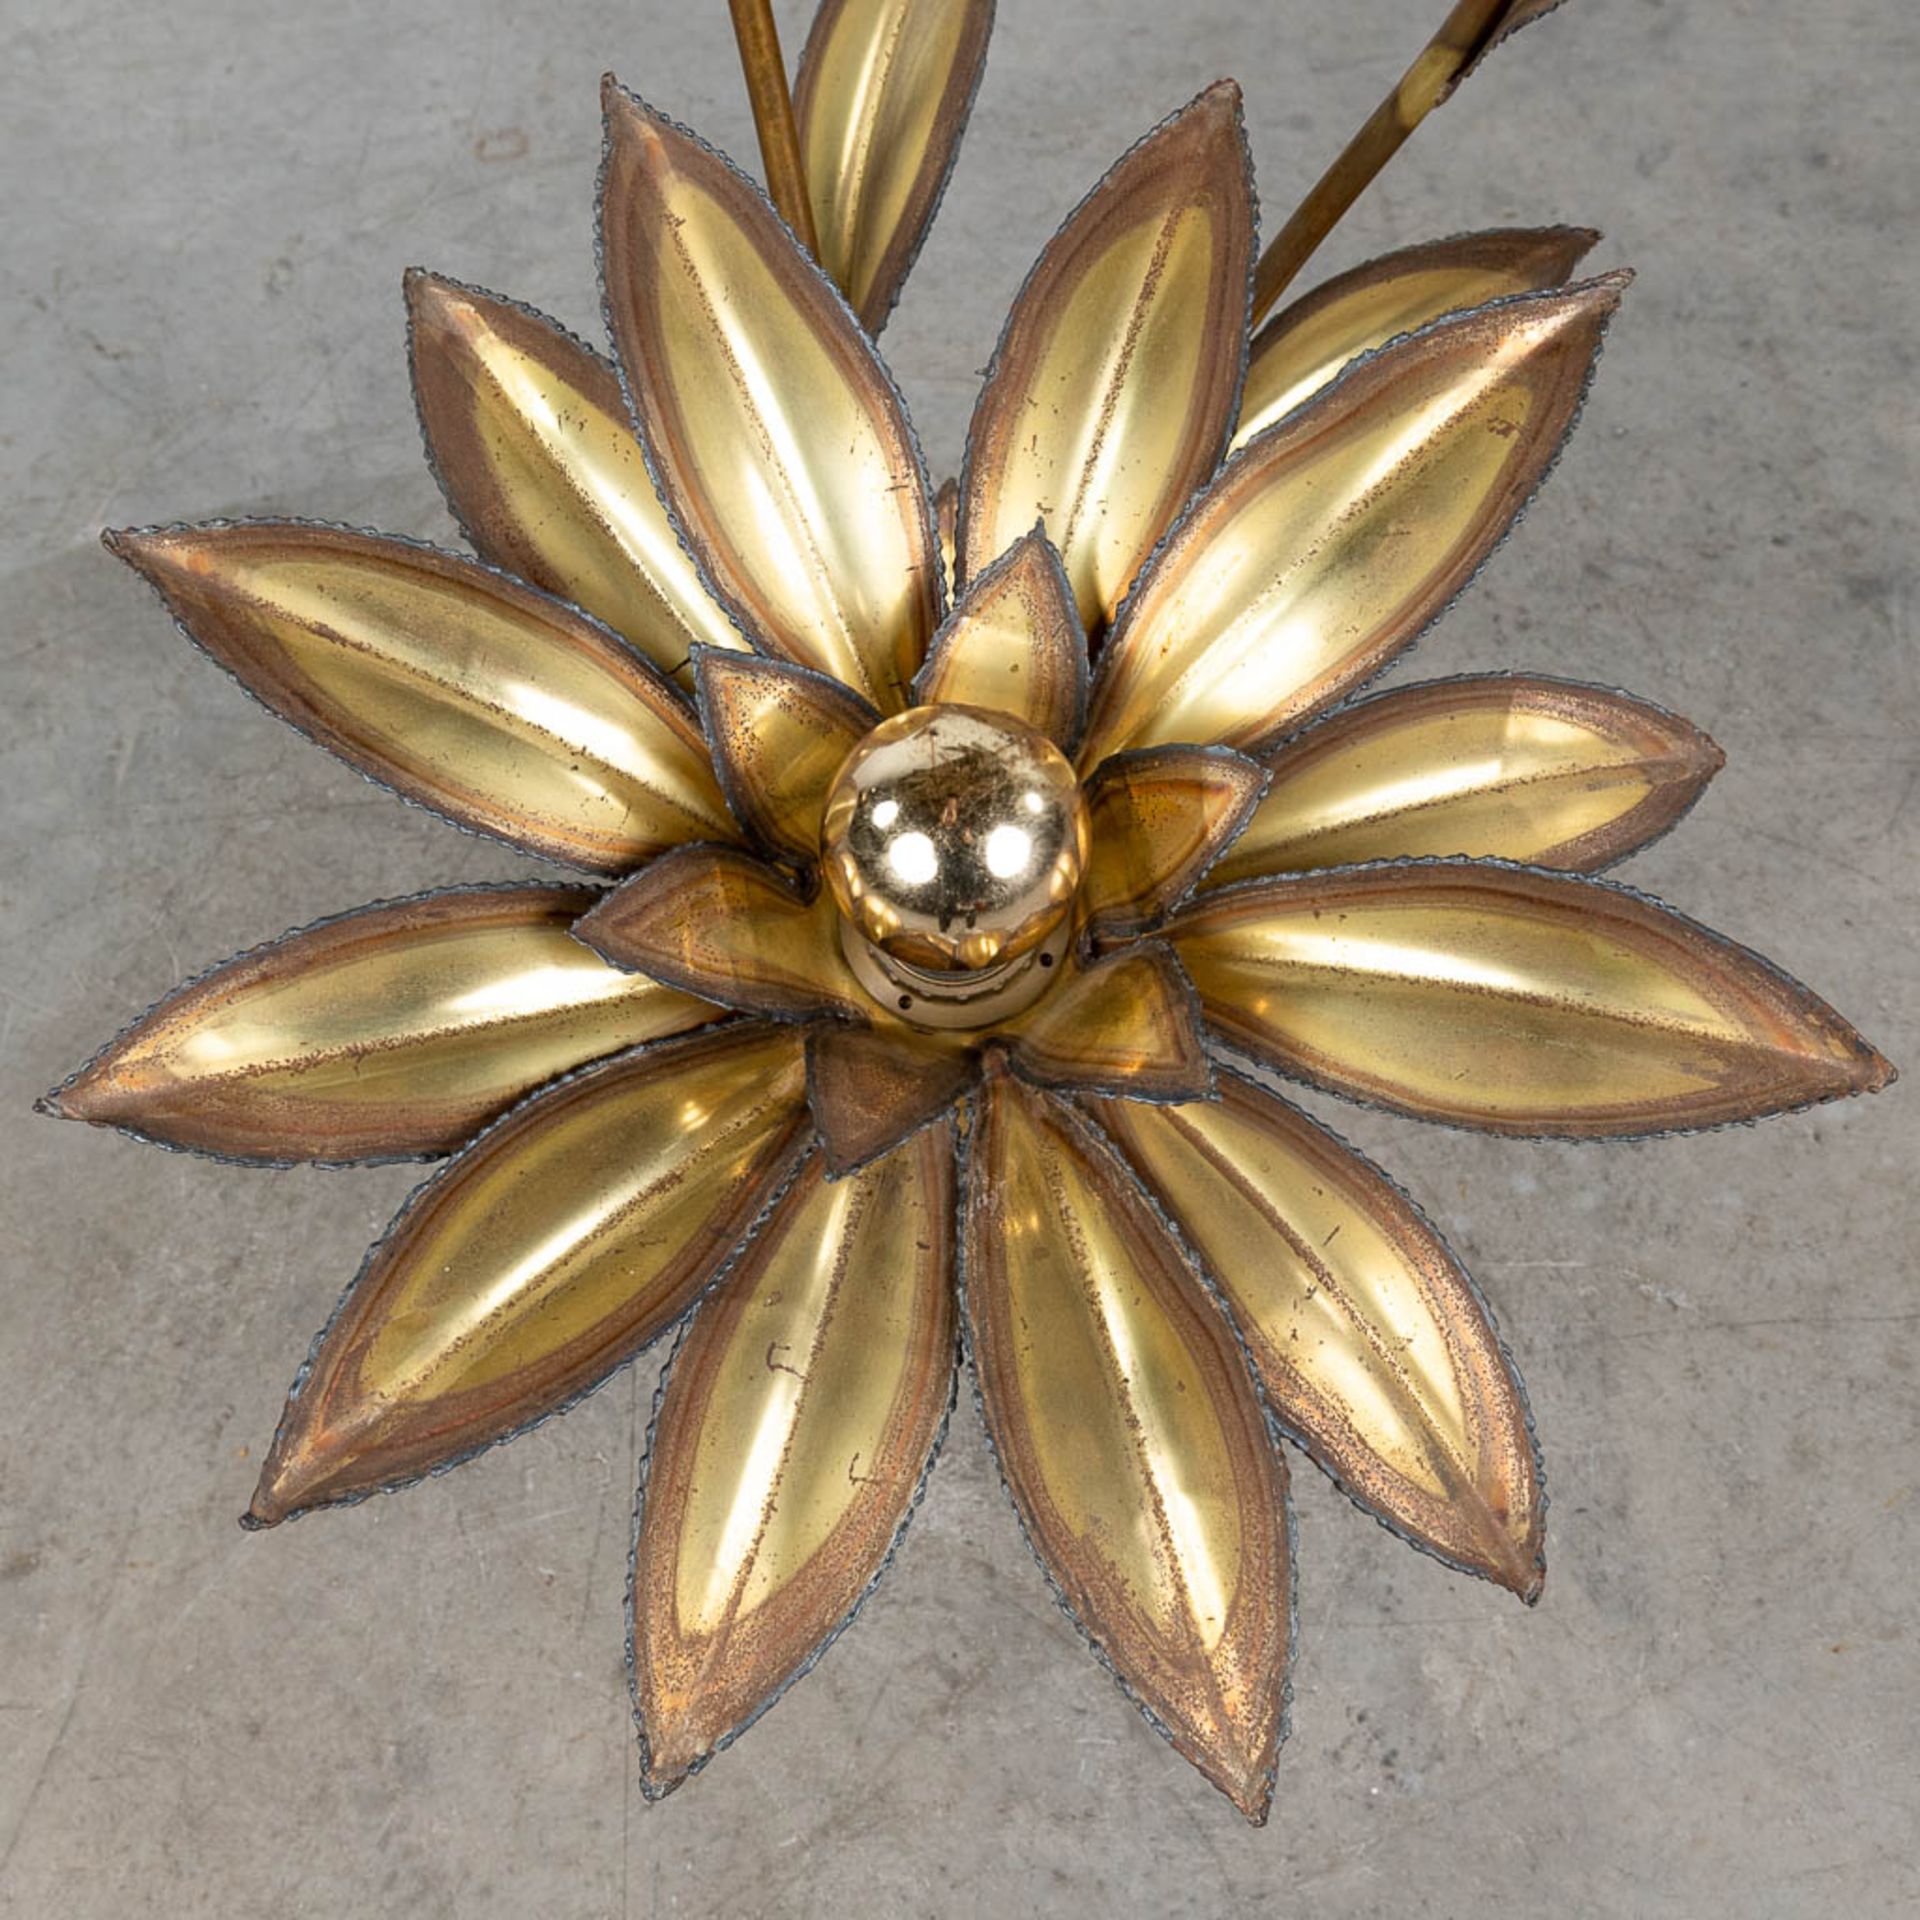 Maison Janssen, a table lamp made of metal flowers. (L:57 x W:68 x H:112 cm) - Image 12 of 15